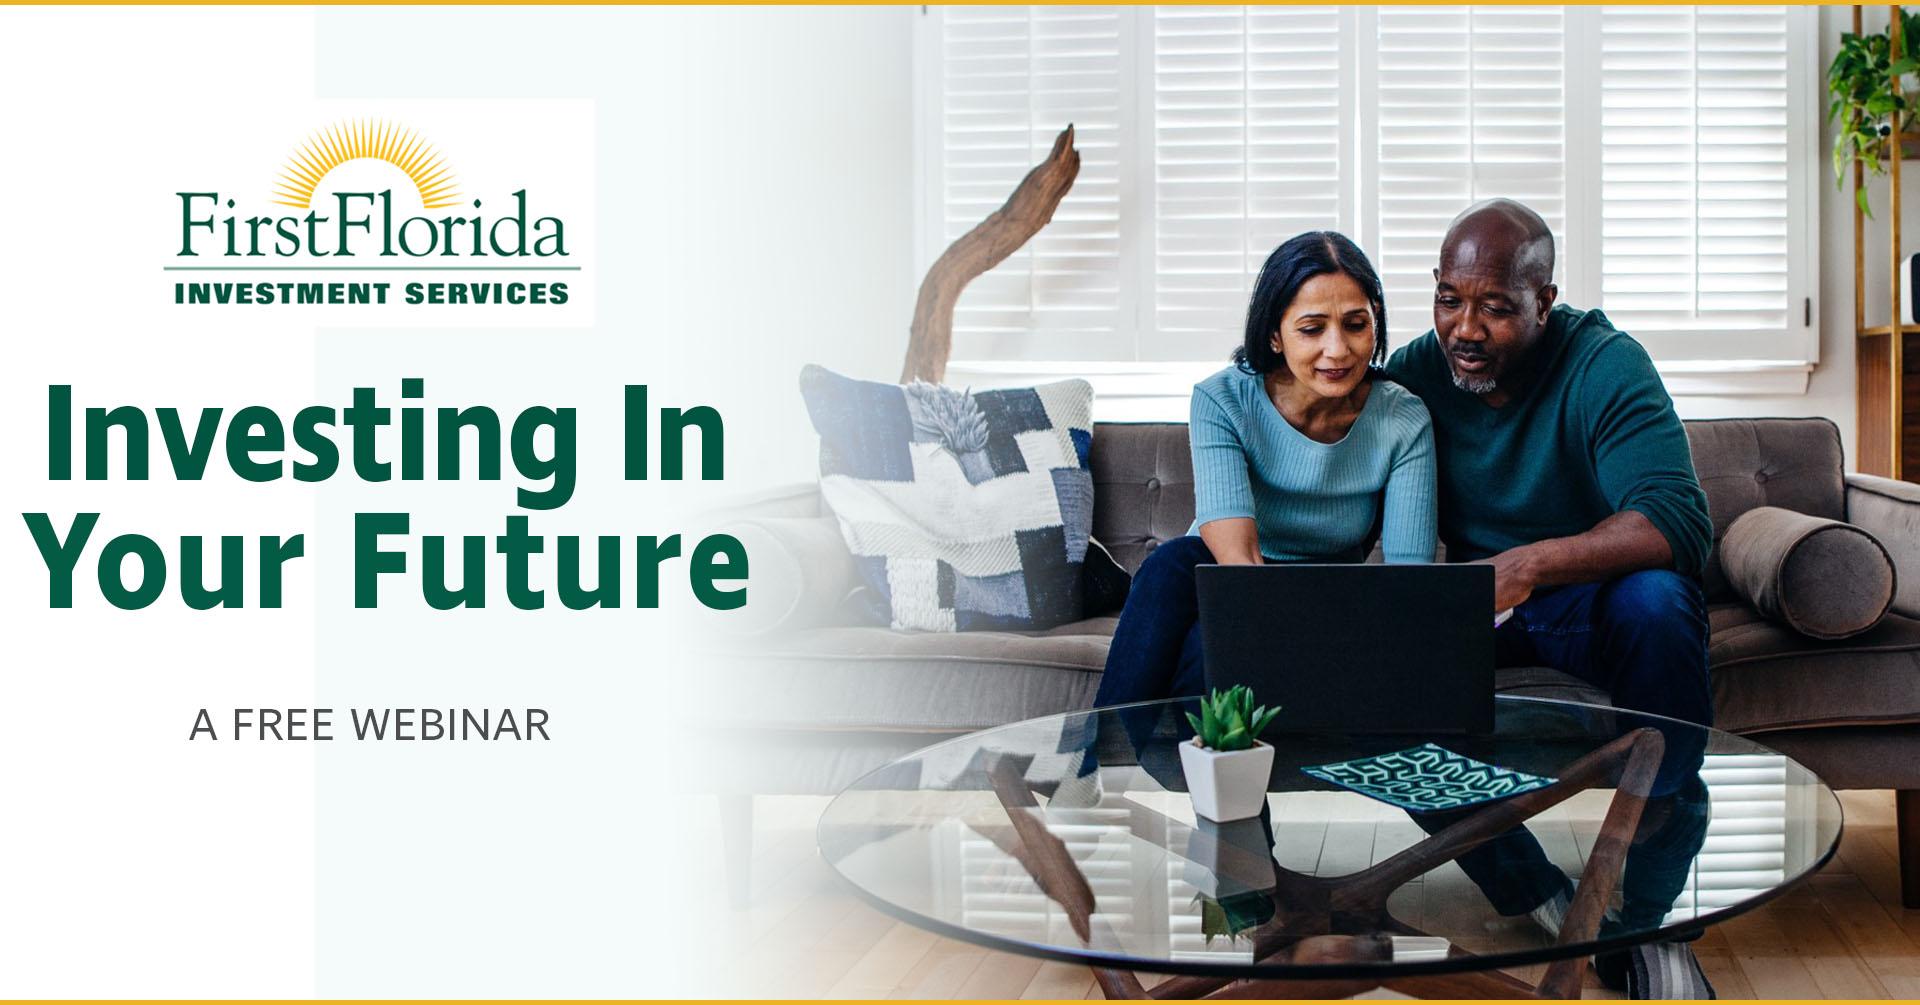 Investing in your future. A free webinar